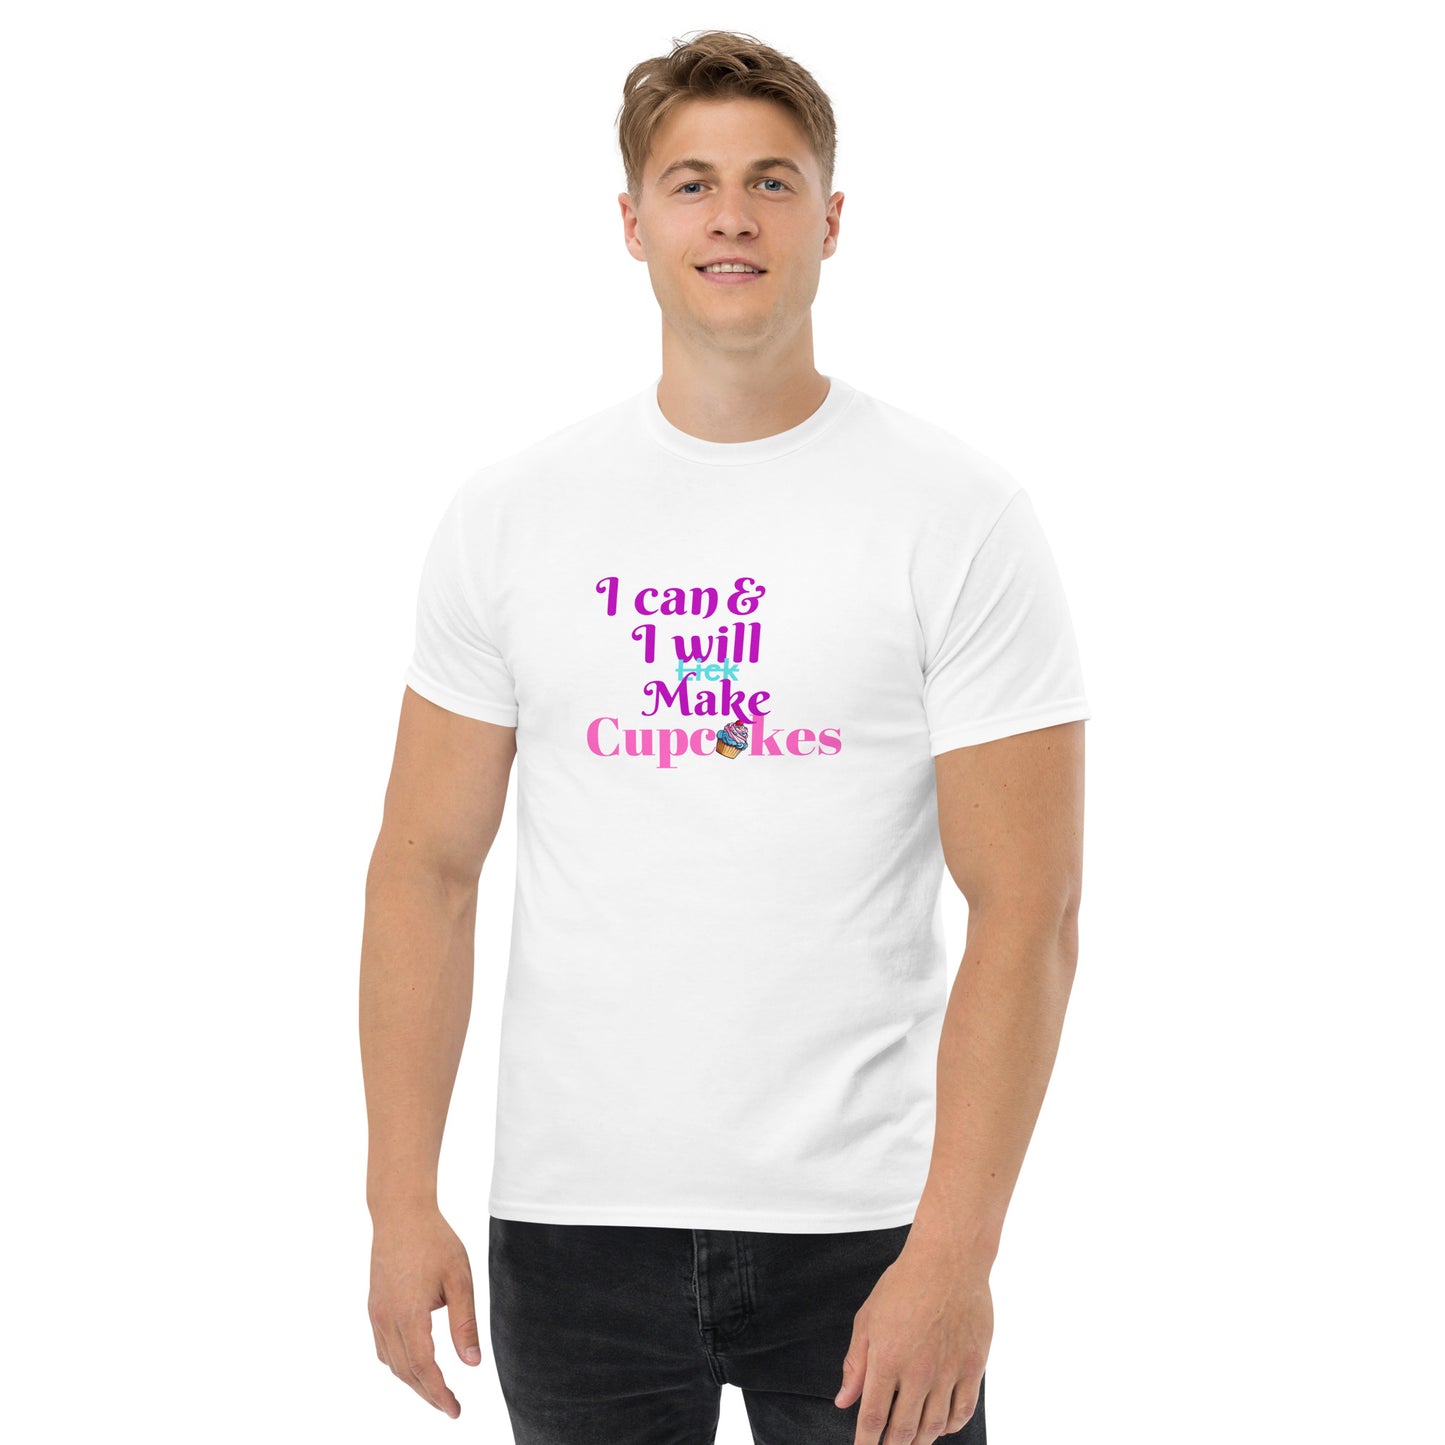 I can and I will Lick/Make Cupcakes Bakery Themed Men's classic tee CedarHill Country Market